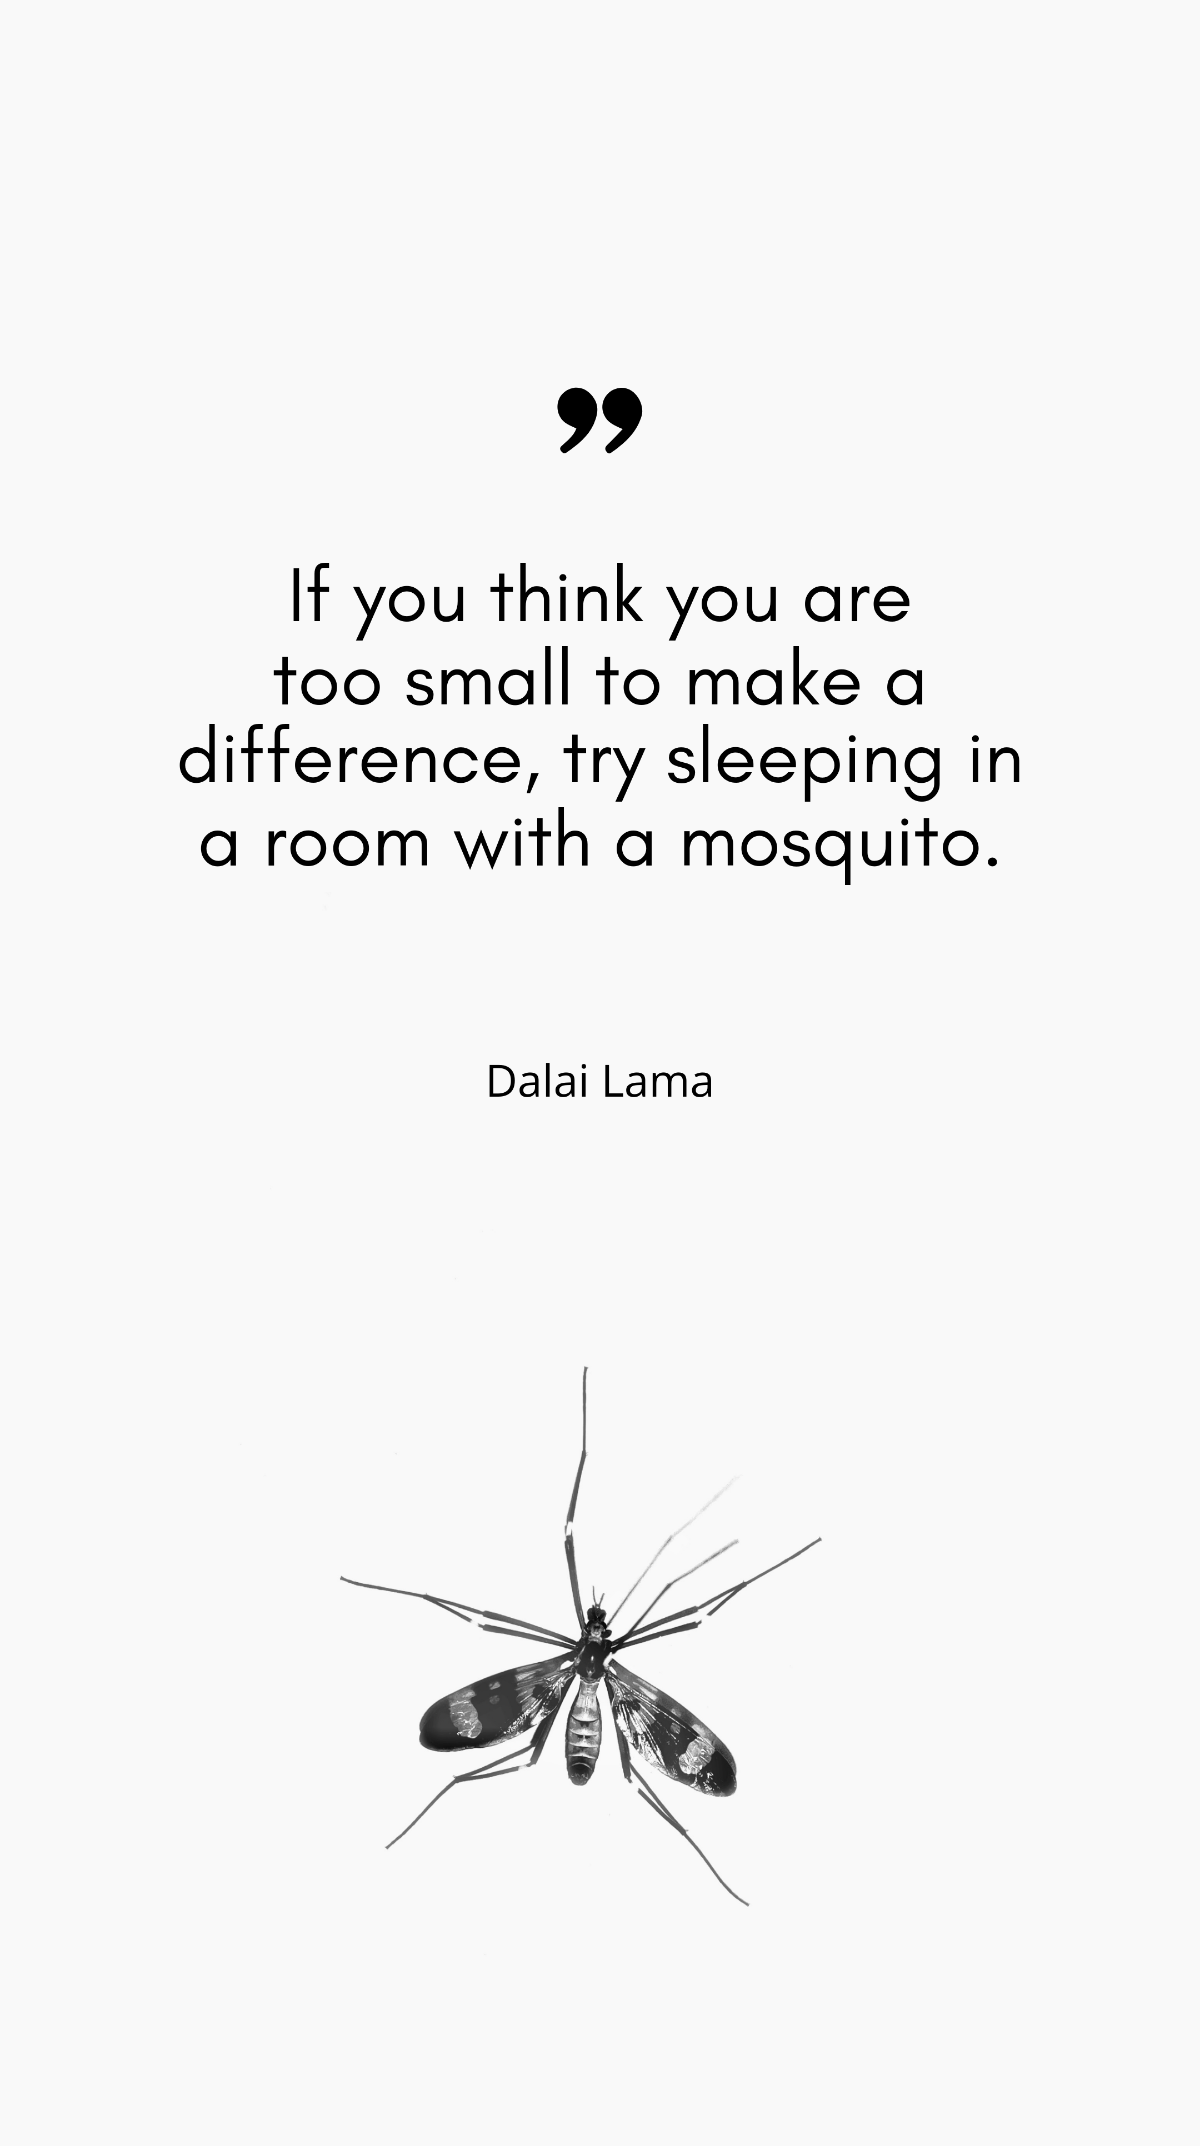 Dalai Lama - If you think you are too small to make a difference, try sleeping in a room with a mosquito. Template